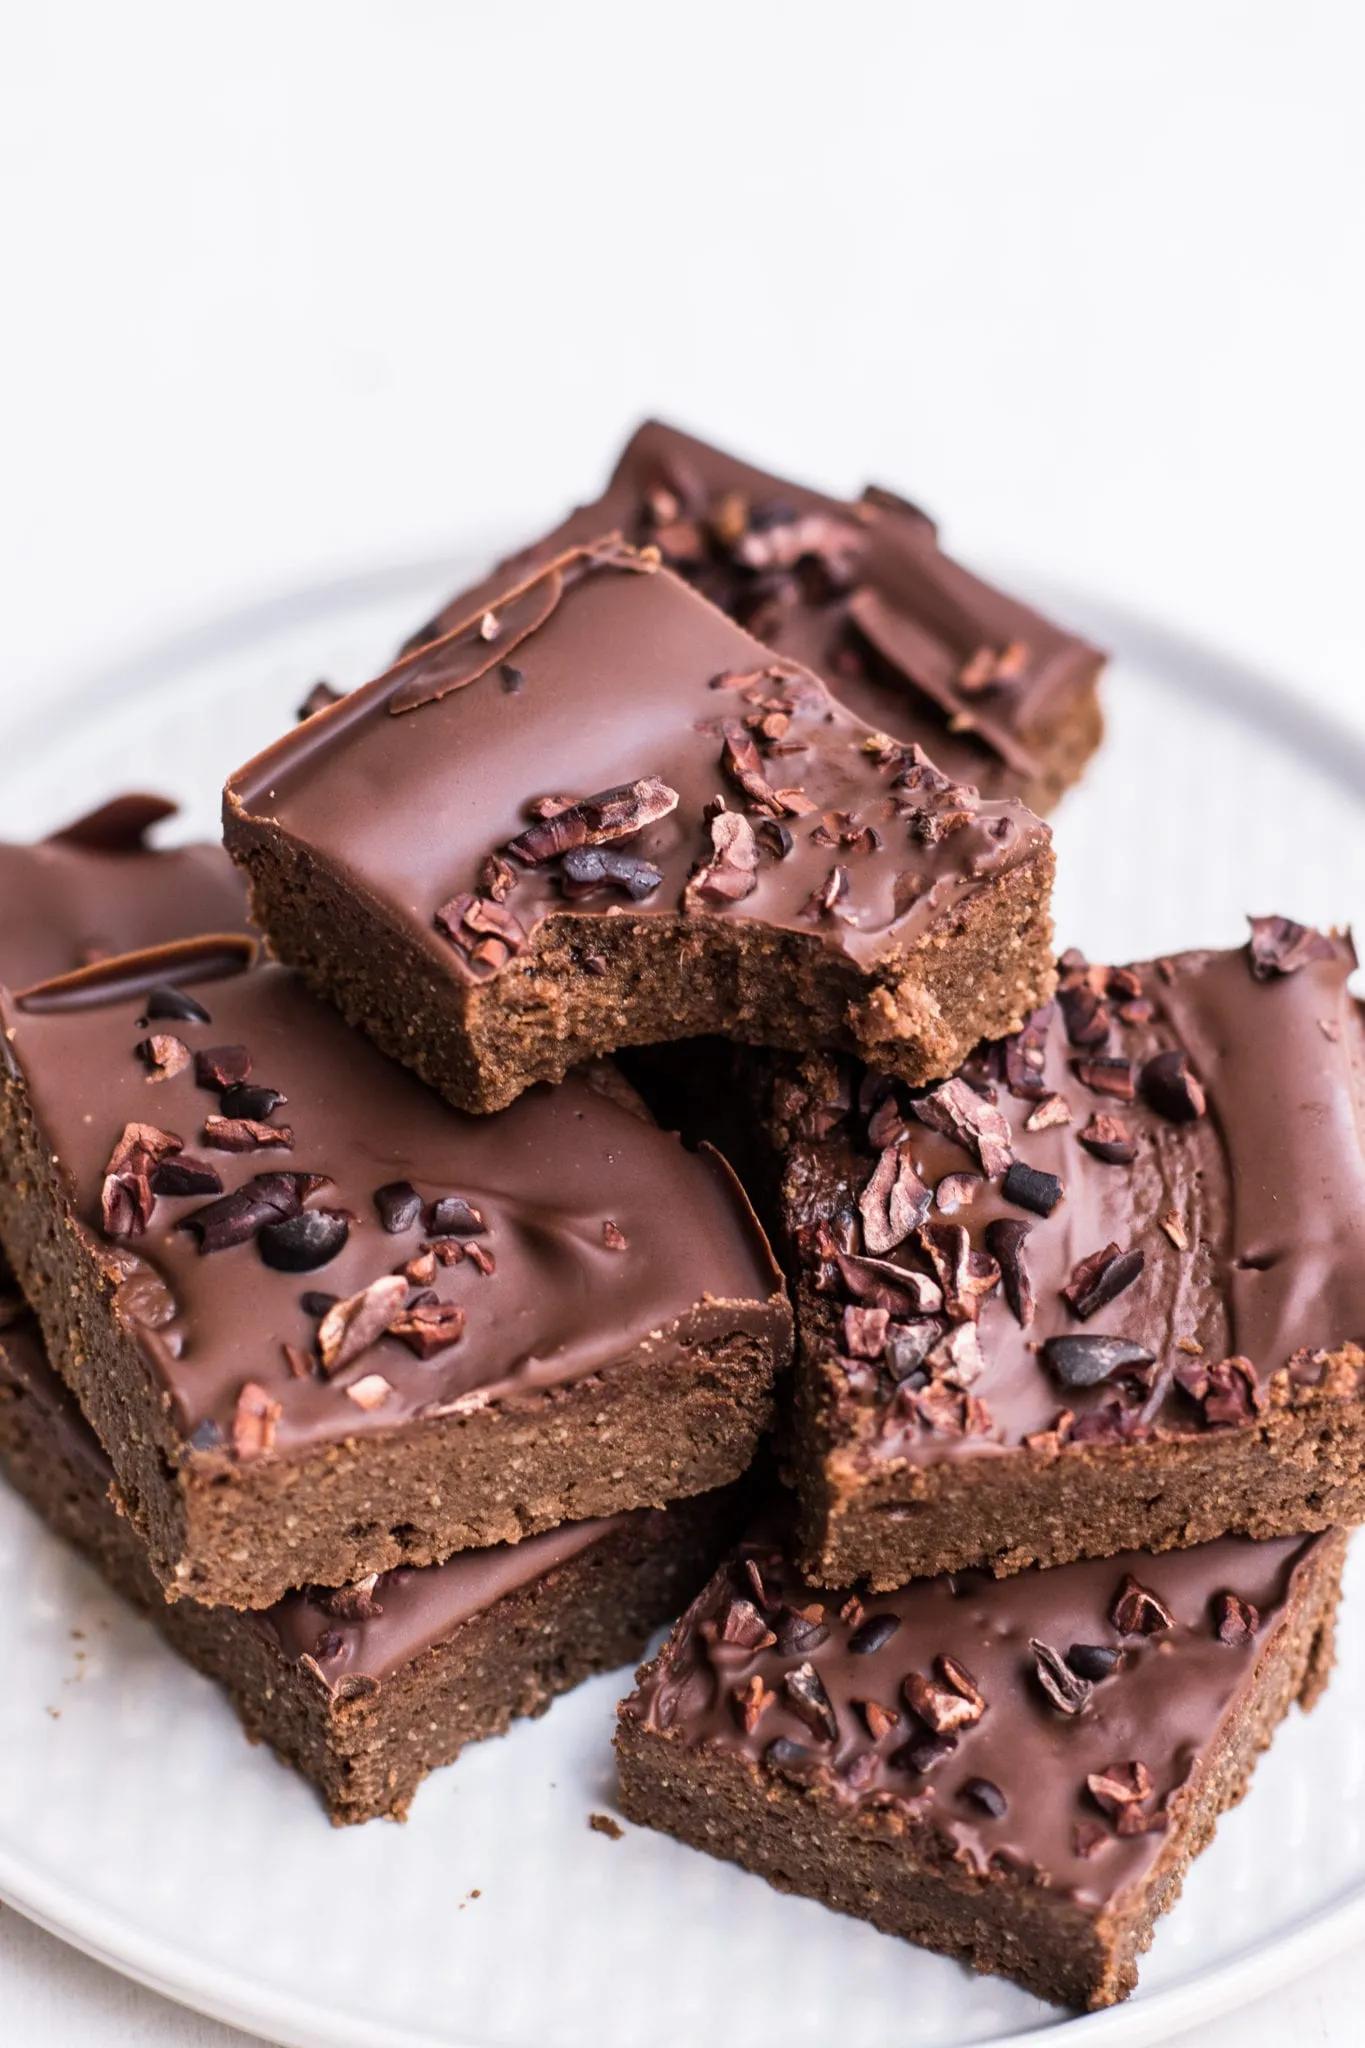 Healthy Keto Brownies with Double the Chocolate - Peanut Butter + Chocolate